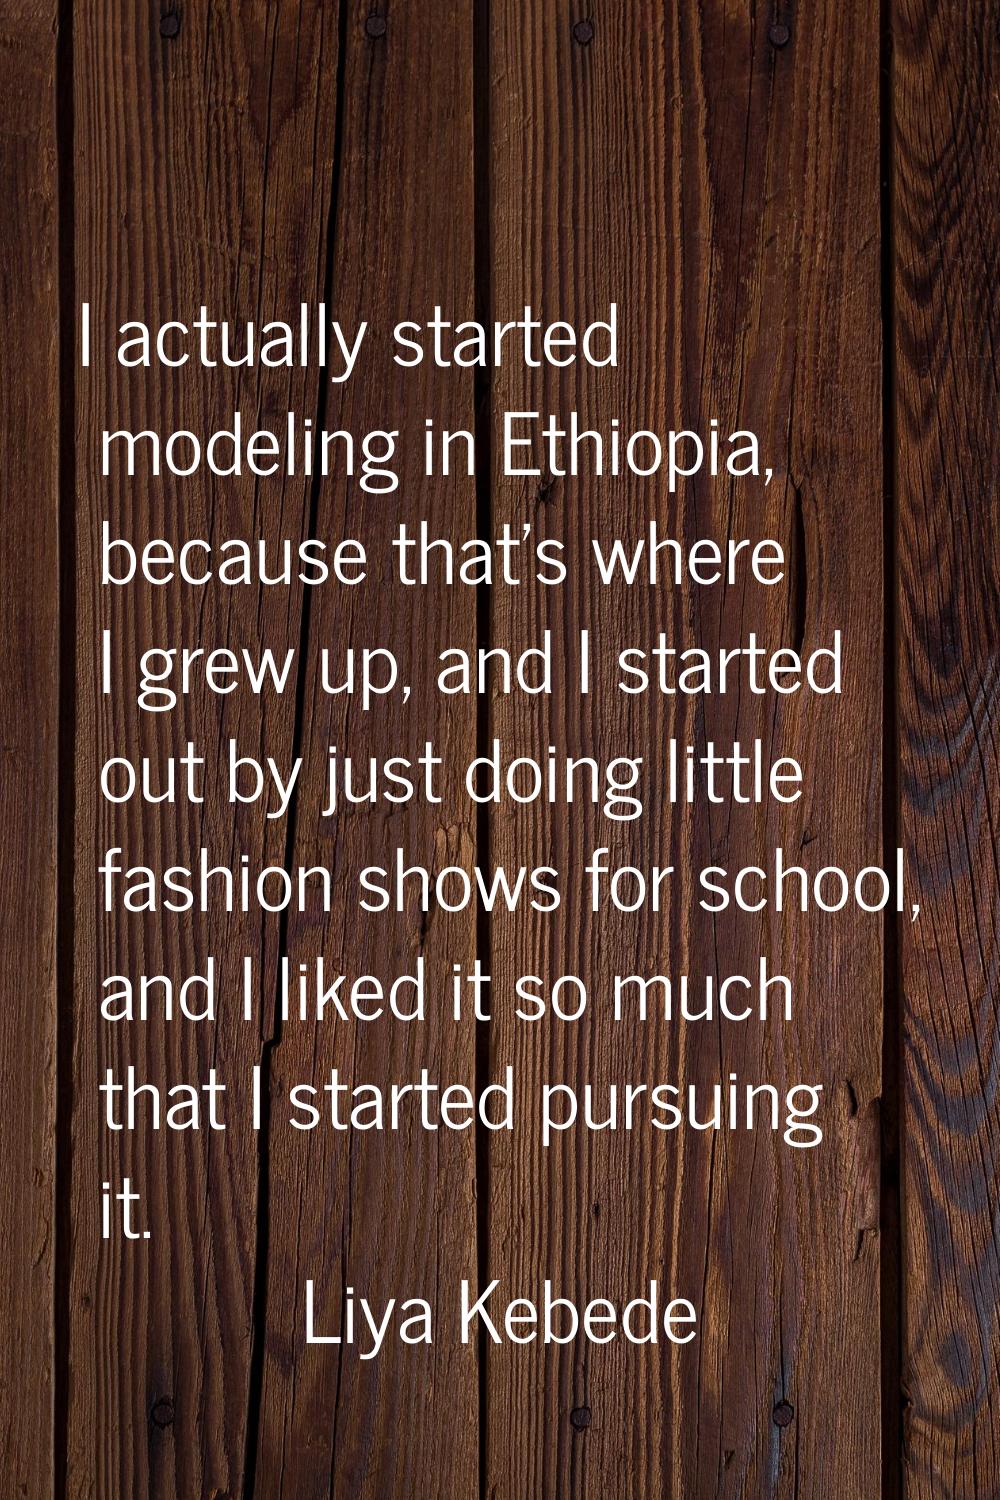 I actually started modeling in Ethiopia, because that's where I grew up, and I started out by just 